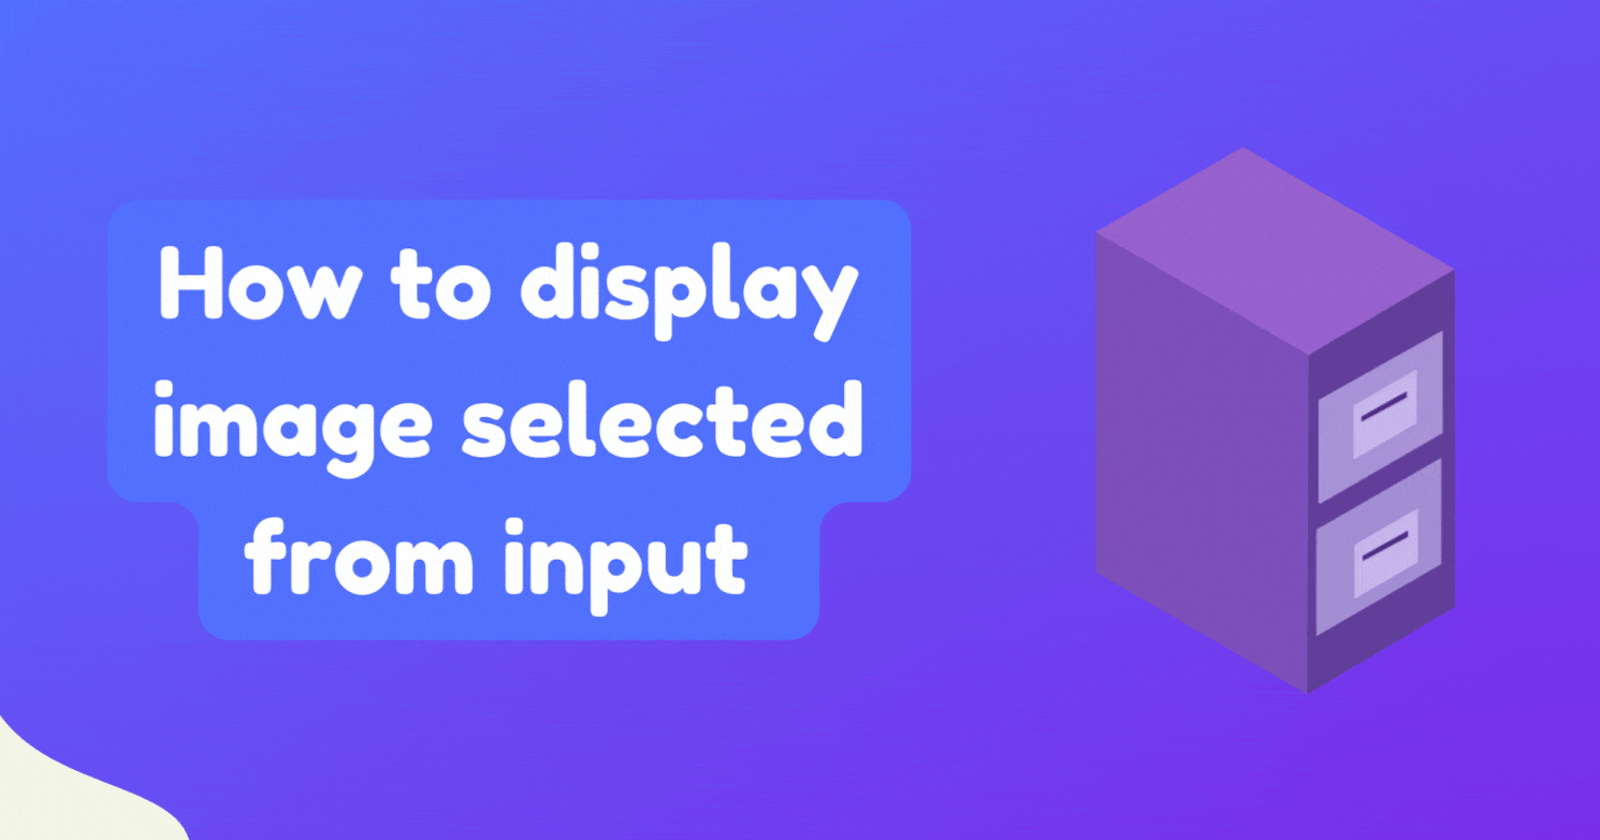 How to display a image selected from input file in react?